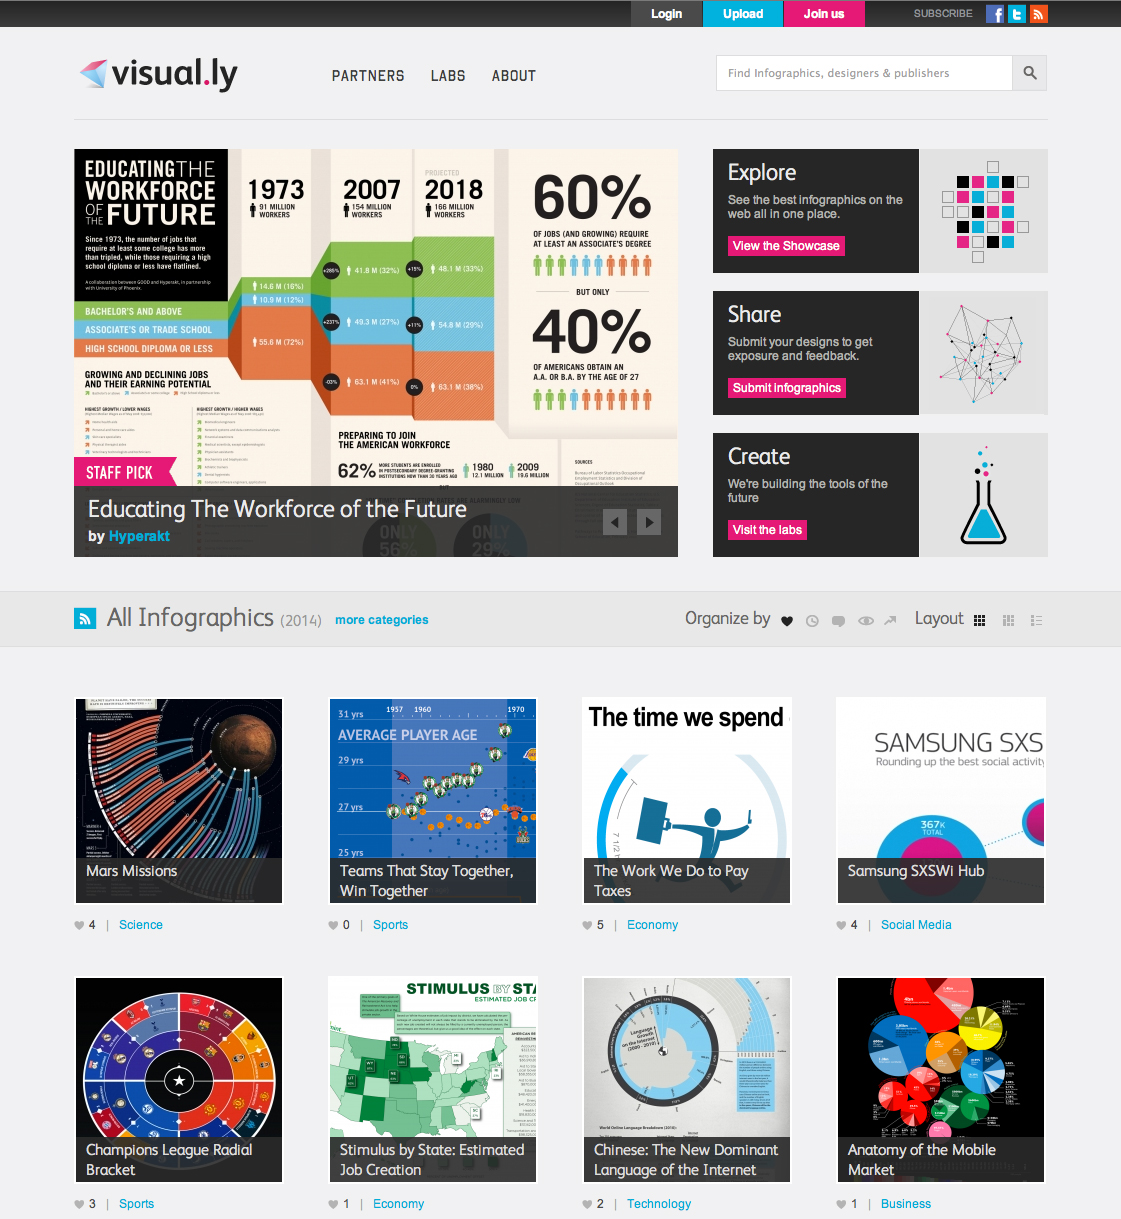 The Ultimate Guide to Marketing Infographics